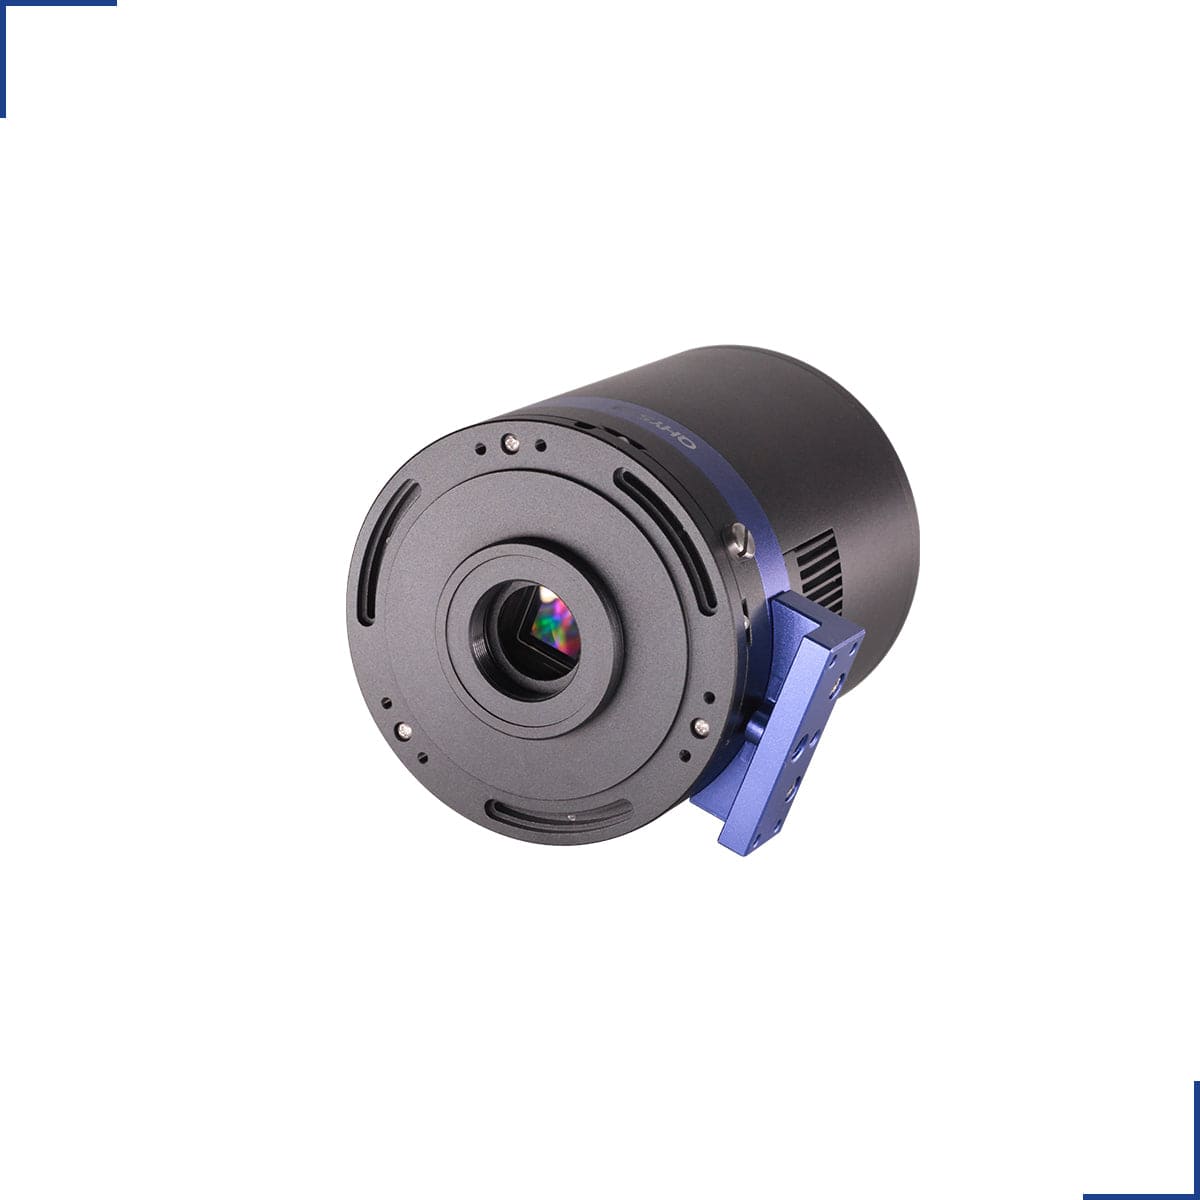 QHYCCD Camera QHYCCD QHY533C Cooled Color CMOS Telescope Astrophotography Camera - QHY553C